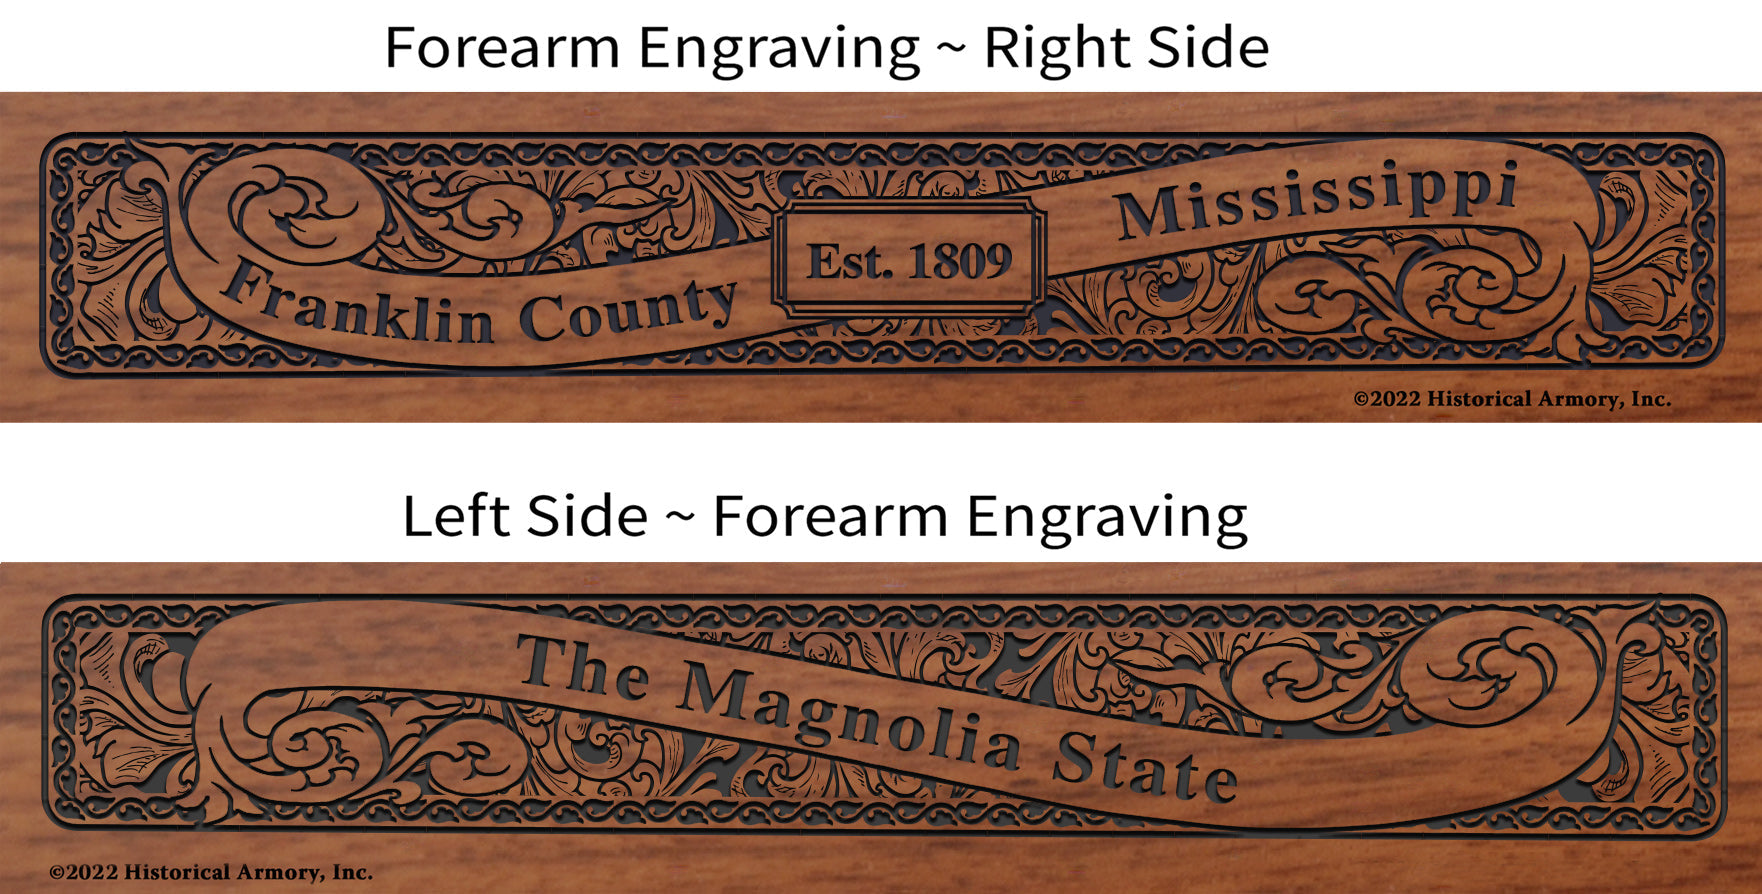 Franklin County Mississippi Engraved Rifle Forearm